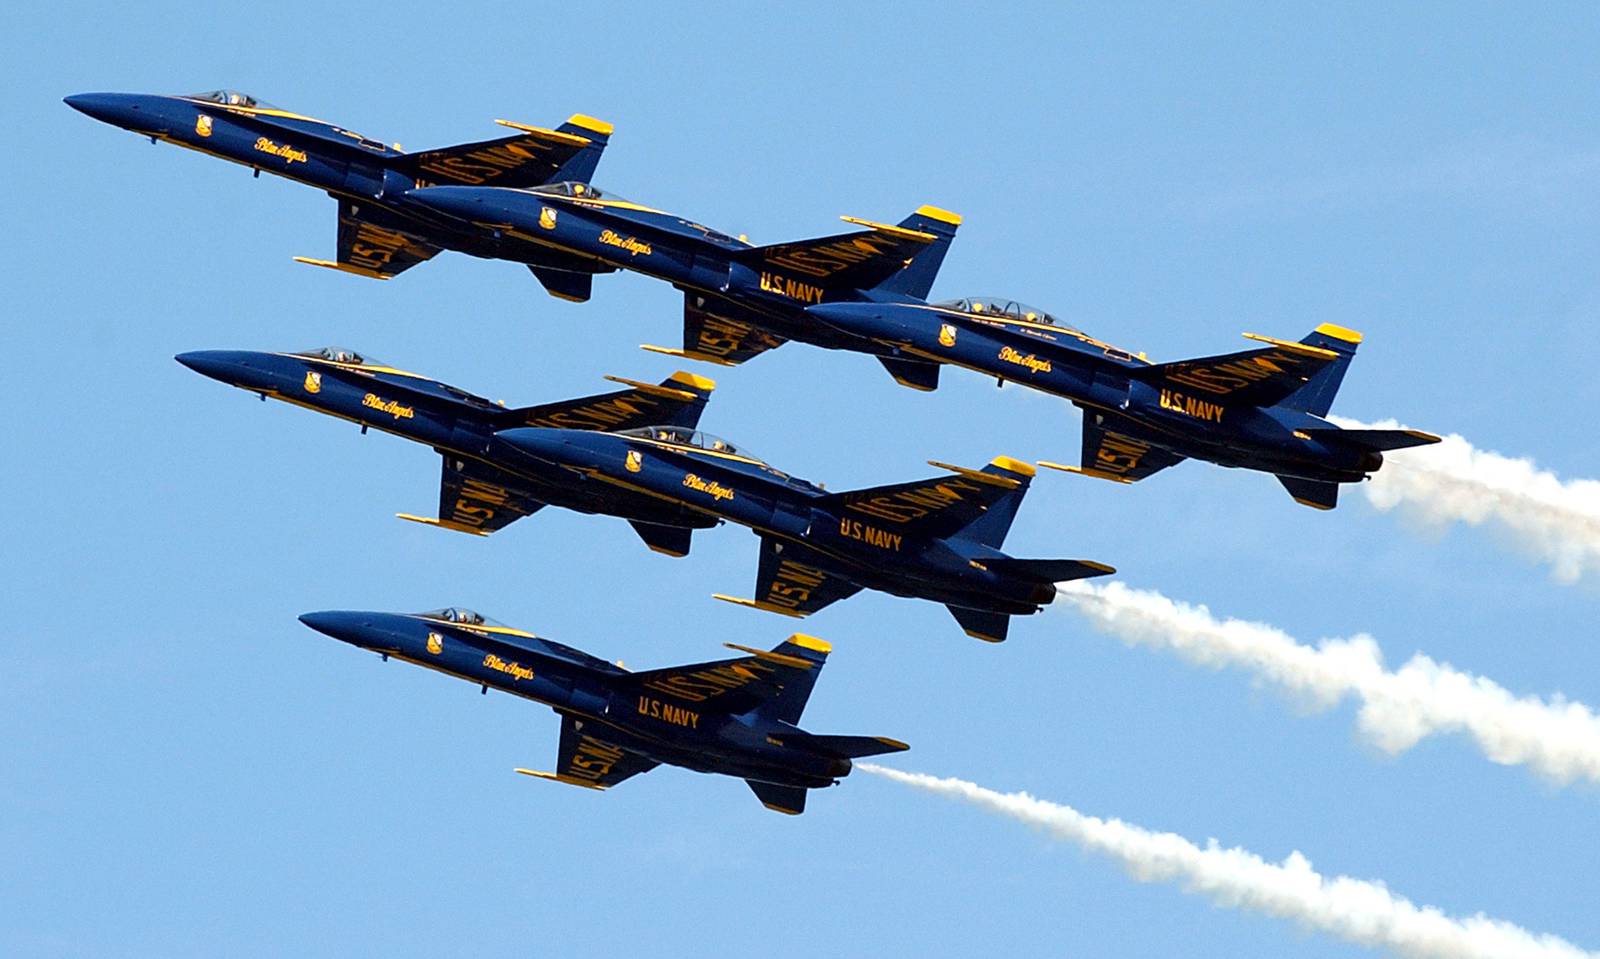 “Double the normal attendance” NAS JAX Airshow reaches capacity on